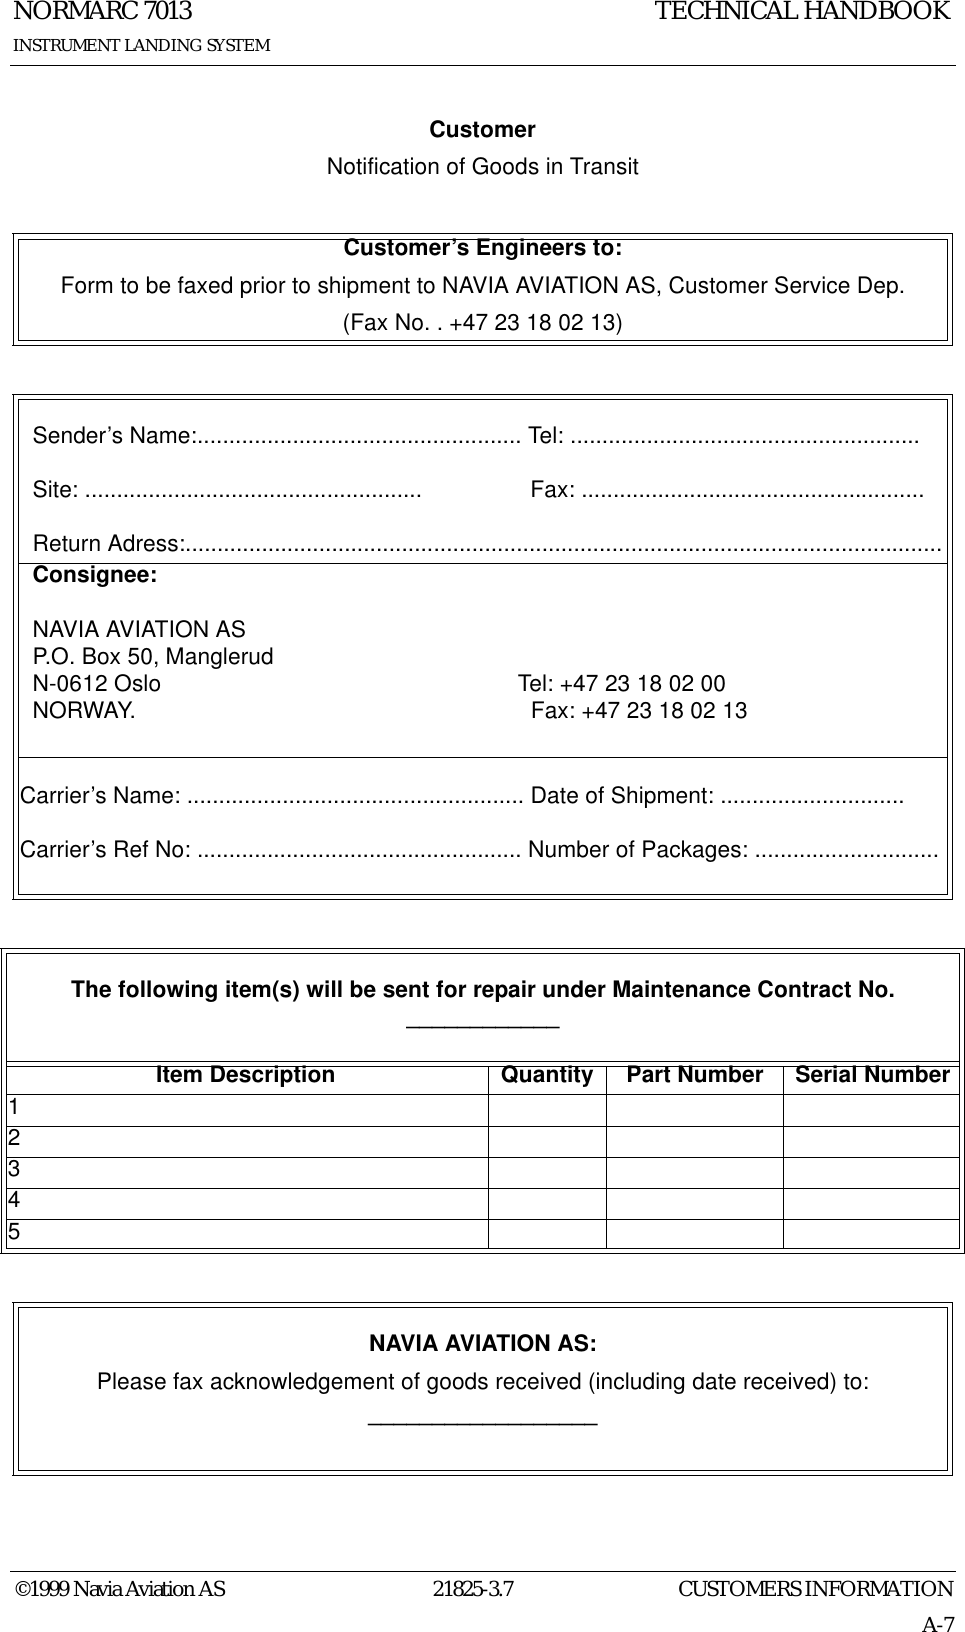 CUSTOMERS INFORMATIONNORMARC 701321825-3.7A-7INSTRUMENT LANDING SYSTEMTECHNICAL HANDBOOK©1999 Navia Aviation ASCustomerNotification of Goods in TransitCustomer’s Engineers to:Form to be faxed prior to shipment to NAVIA AVIATION AS, Customer Service Dep.(Fax No. . +47 23 18 02 13)   Sender’s Name:................................................... Tel: .......................................................  Site: .....................................................                 Fax: ......................................................  Return Adress:.......................................................................................................................  Consignee:  NAVIA AVIATION AS  P.O. Box 50, Manglerud  N-0612 Oslo                                                        Tel: +47 23 18 02 00  NORWAY.                                                              Fax: +47 23 18 02 13Carrier’s Name: ..................................................... Date of Shipment: .............................Carrier’s Ref No: ................................................... Number of Packages: .............................The following item(s) will be sent for repair under Maintenance Contract No.  ____________Item Description Quantity Part Number Serial Number12345NAVIA AVIATION AS:Please fax acknowledgement of goods received (including date received) to:__________________